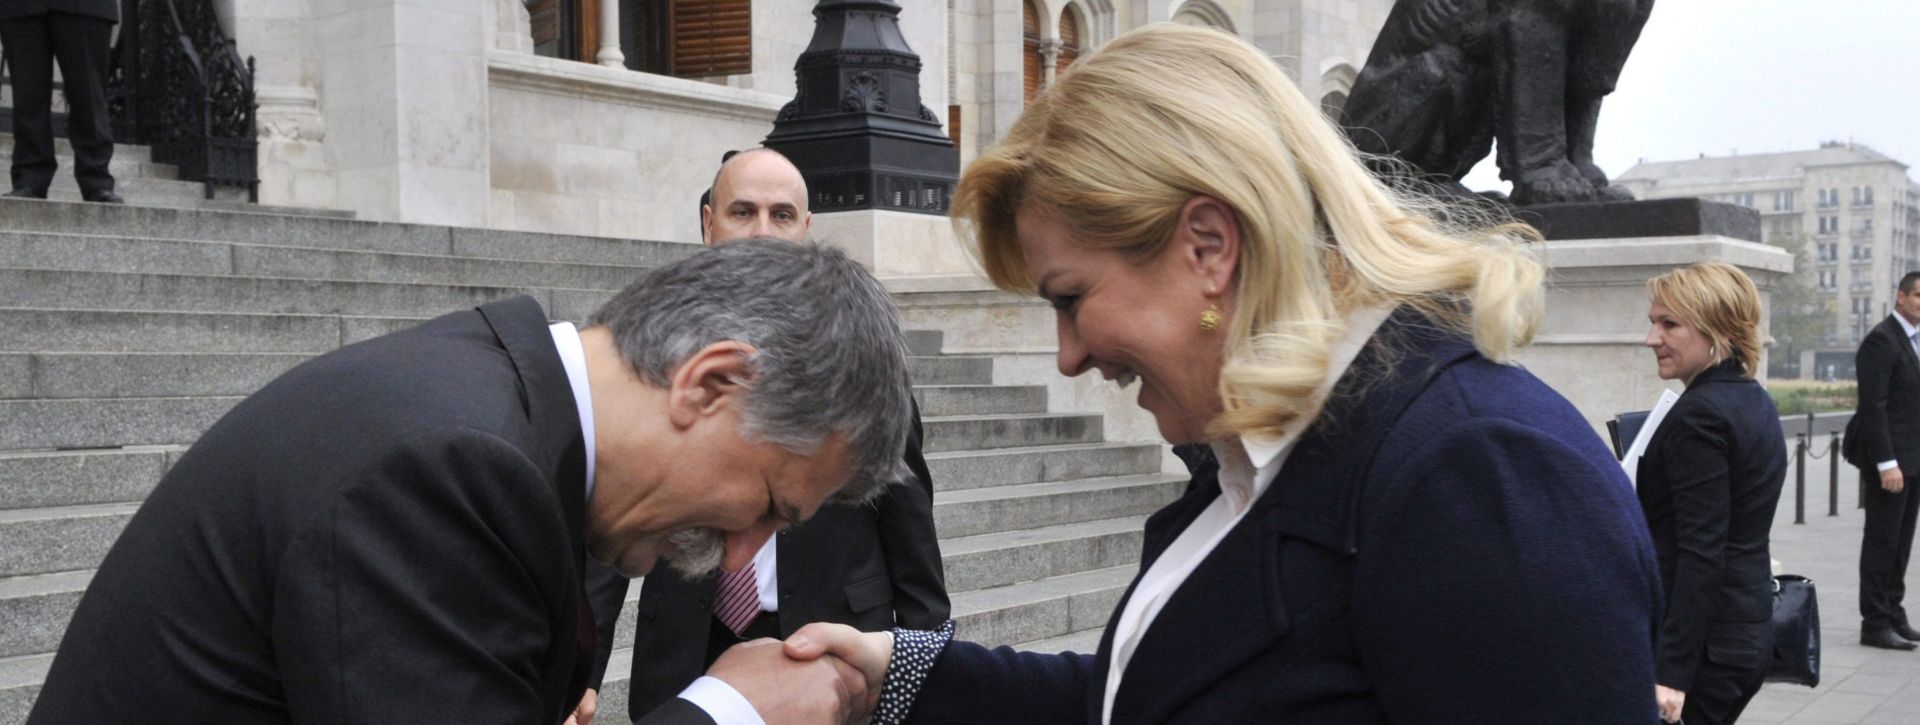 epa04966731 Speaker of the Hungarian Parliament Laszlo Kover (L) greets Croatian President Kolinda Grabar-Kitarovic in front of the Hungarian Parliament in Budapest, Hungary, 07 October 2015. Kolinda Grabar-Kitarovic is on a three-day official visit in Budapest.  EPA/ATTILA KOVACS HUNGARY OUT